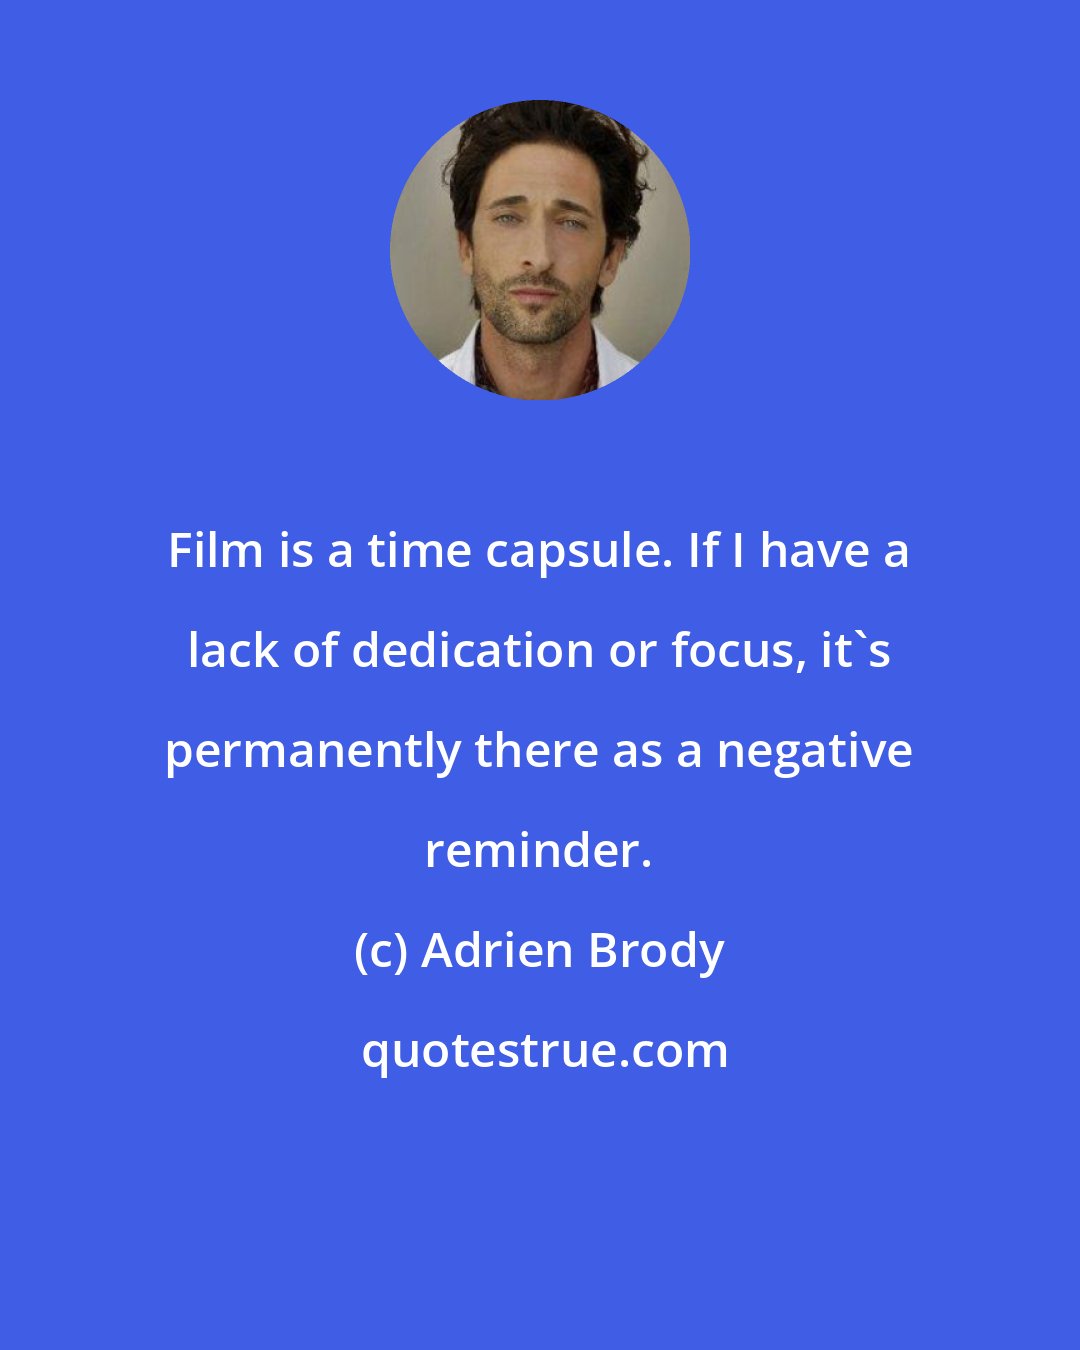 Adrien Brody: Film is a time capsule. If I have a lack of dedication or focus, it's permanently there as a negative reminder.